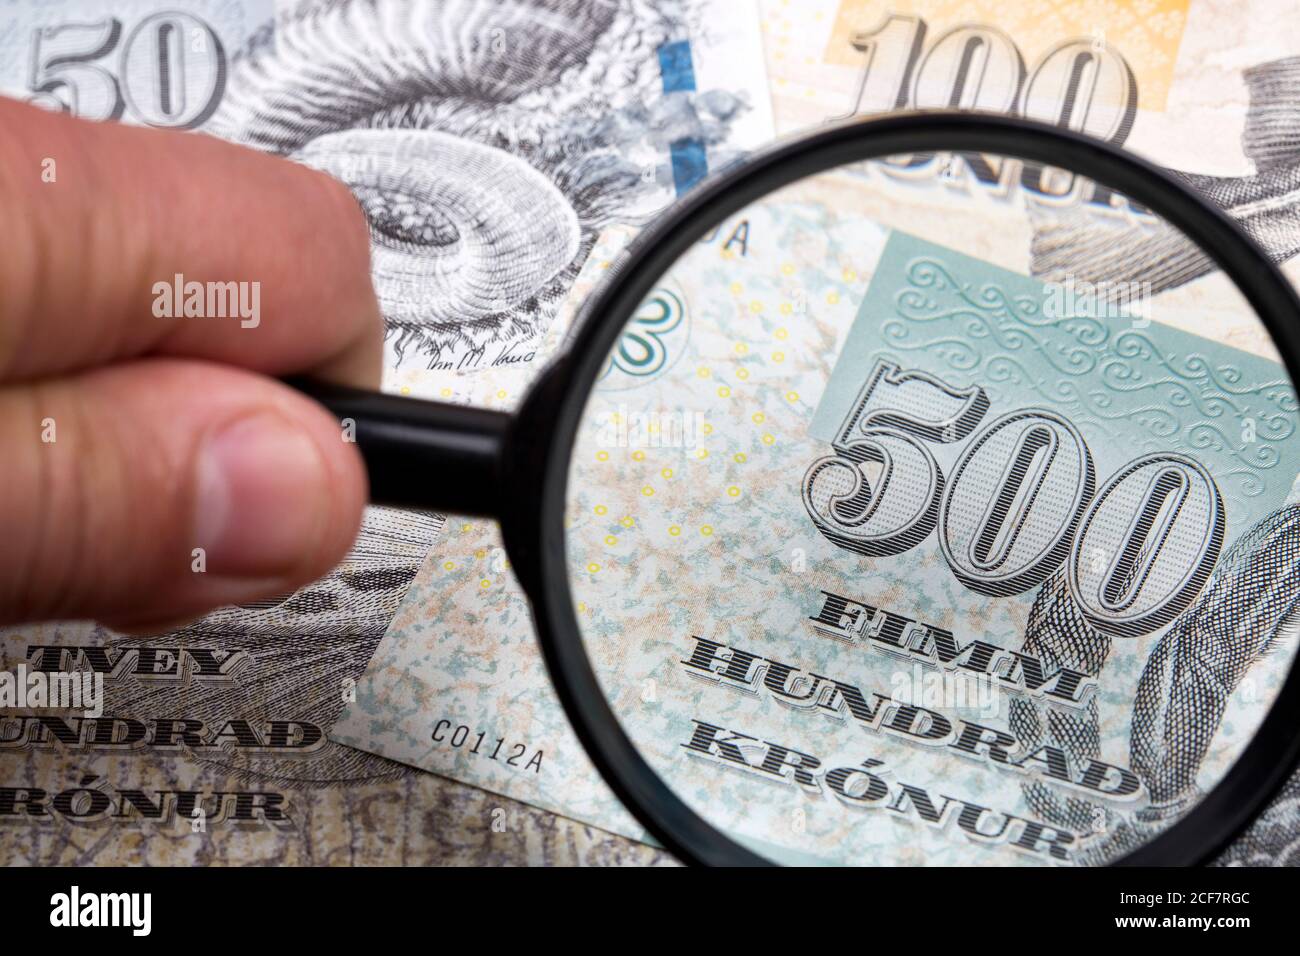 Money from the Faroe Islands in a magnifying glass a business background Stock Photo